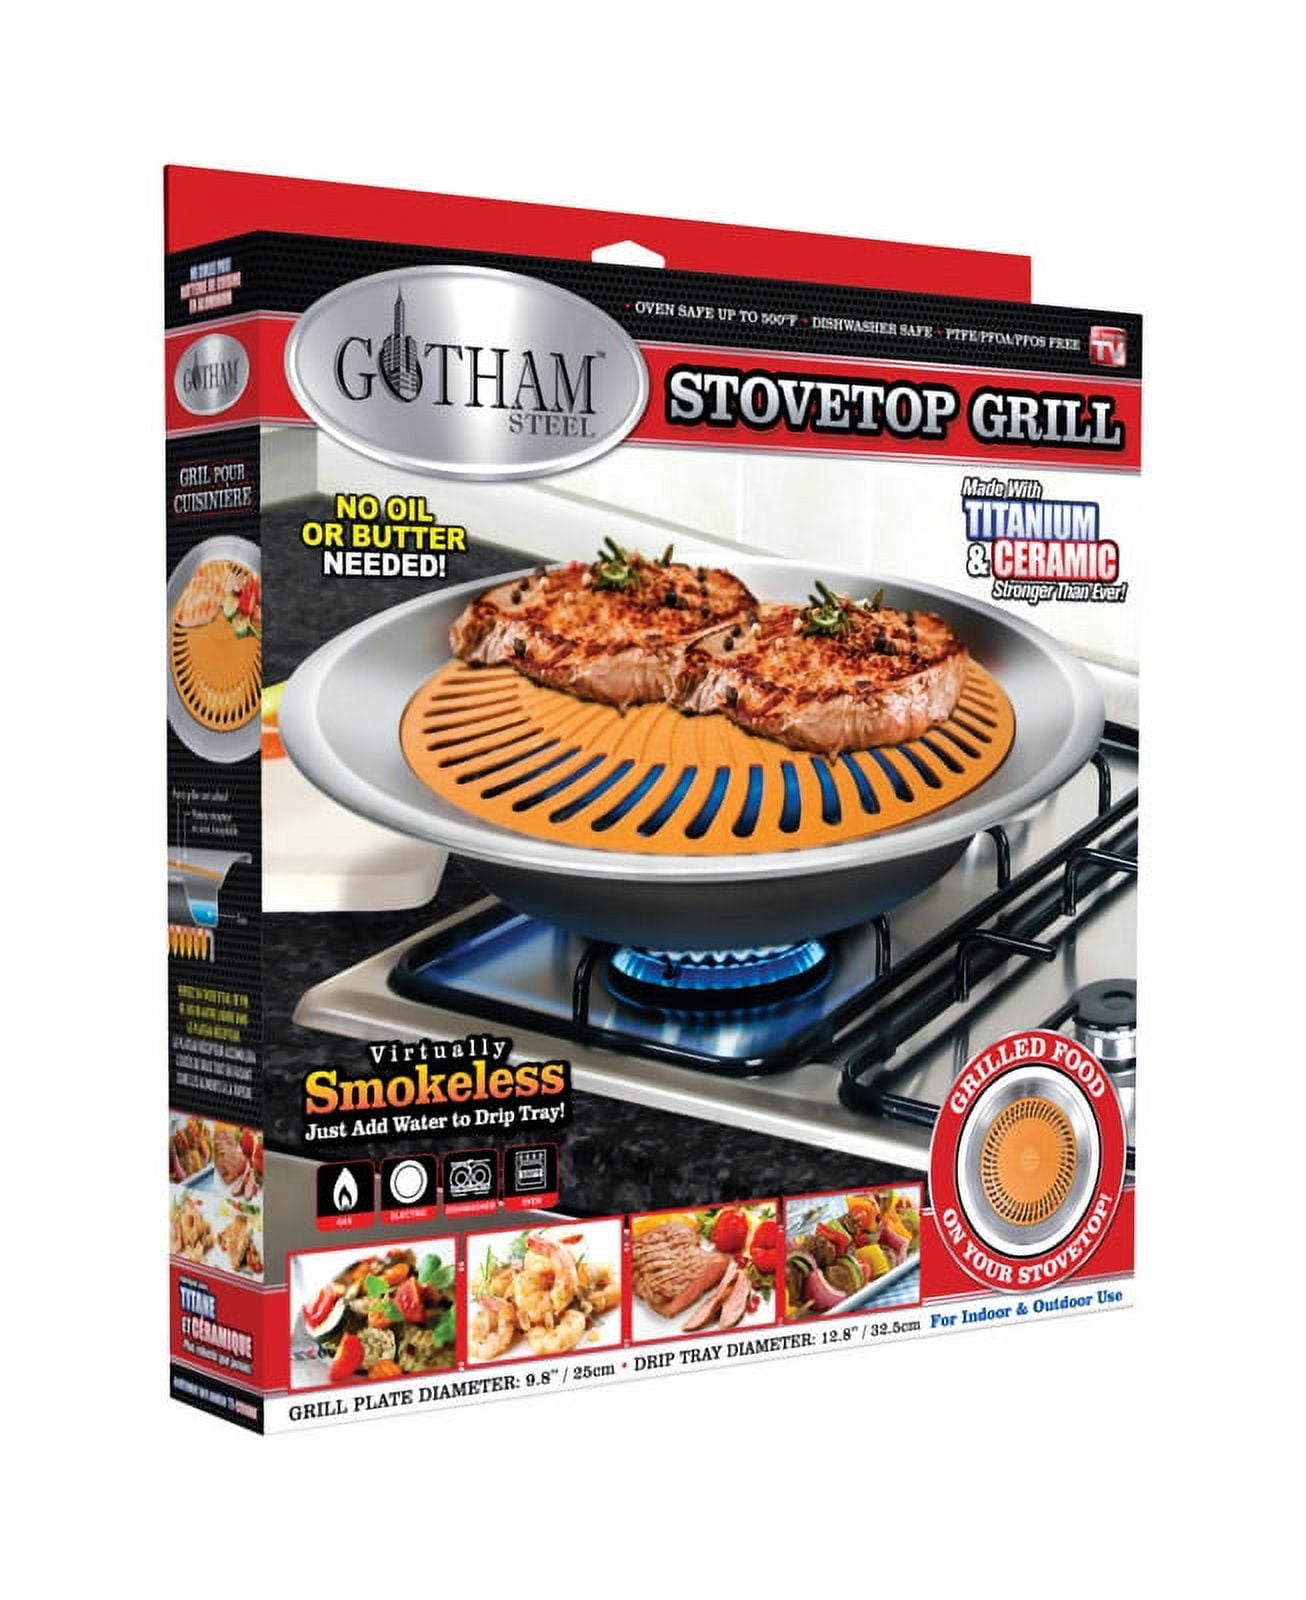 Gotham Steel XL Reversible Grill and Griddle Stovetop Pan – Family Size  Double Grill for Indoor Gas, Electric & Glass Stovetops, Ultra Nonstick